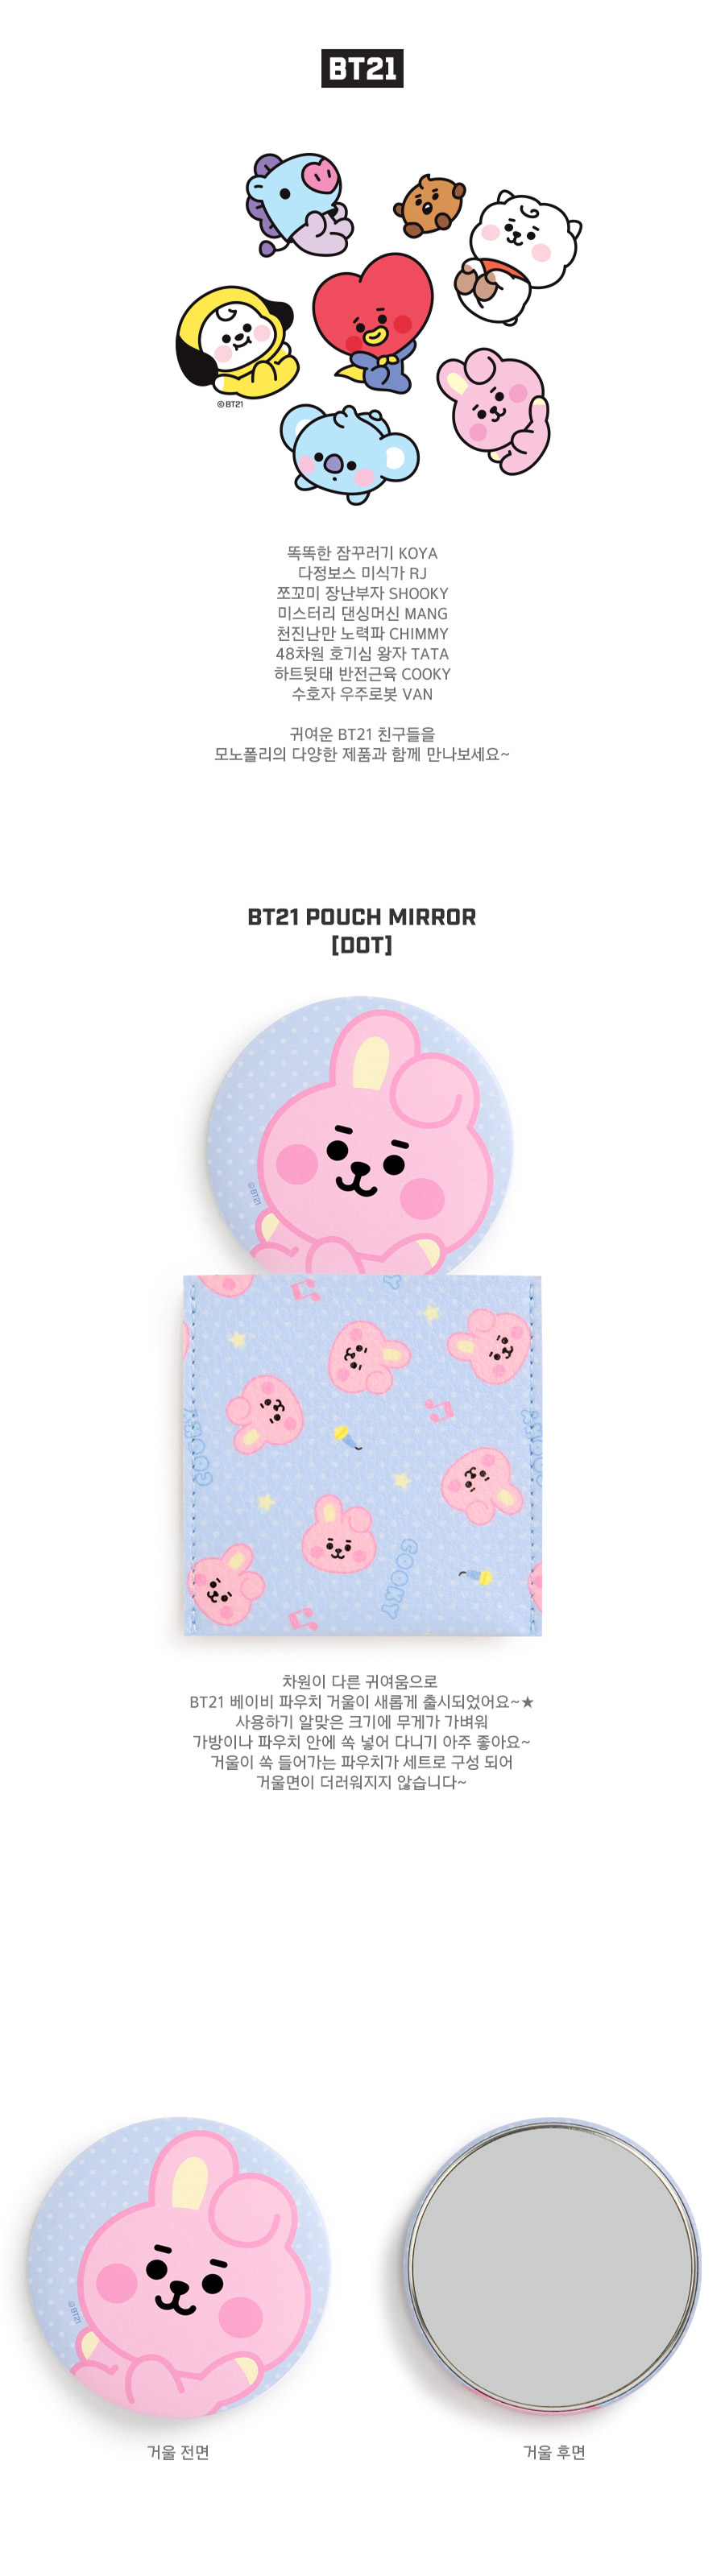 [BT21] BT21 X Monopoly Collaboration - Baby Pouch Mirror [Dot]